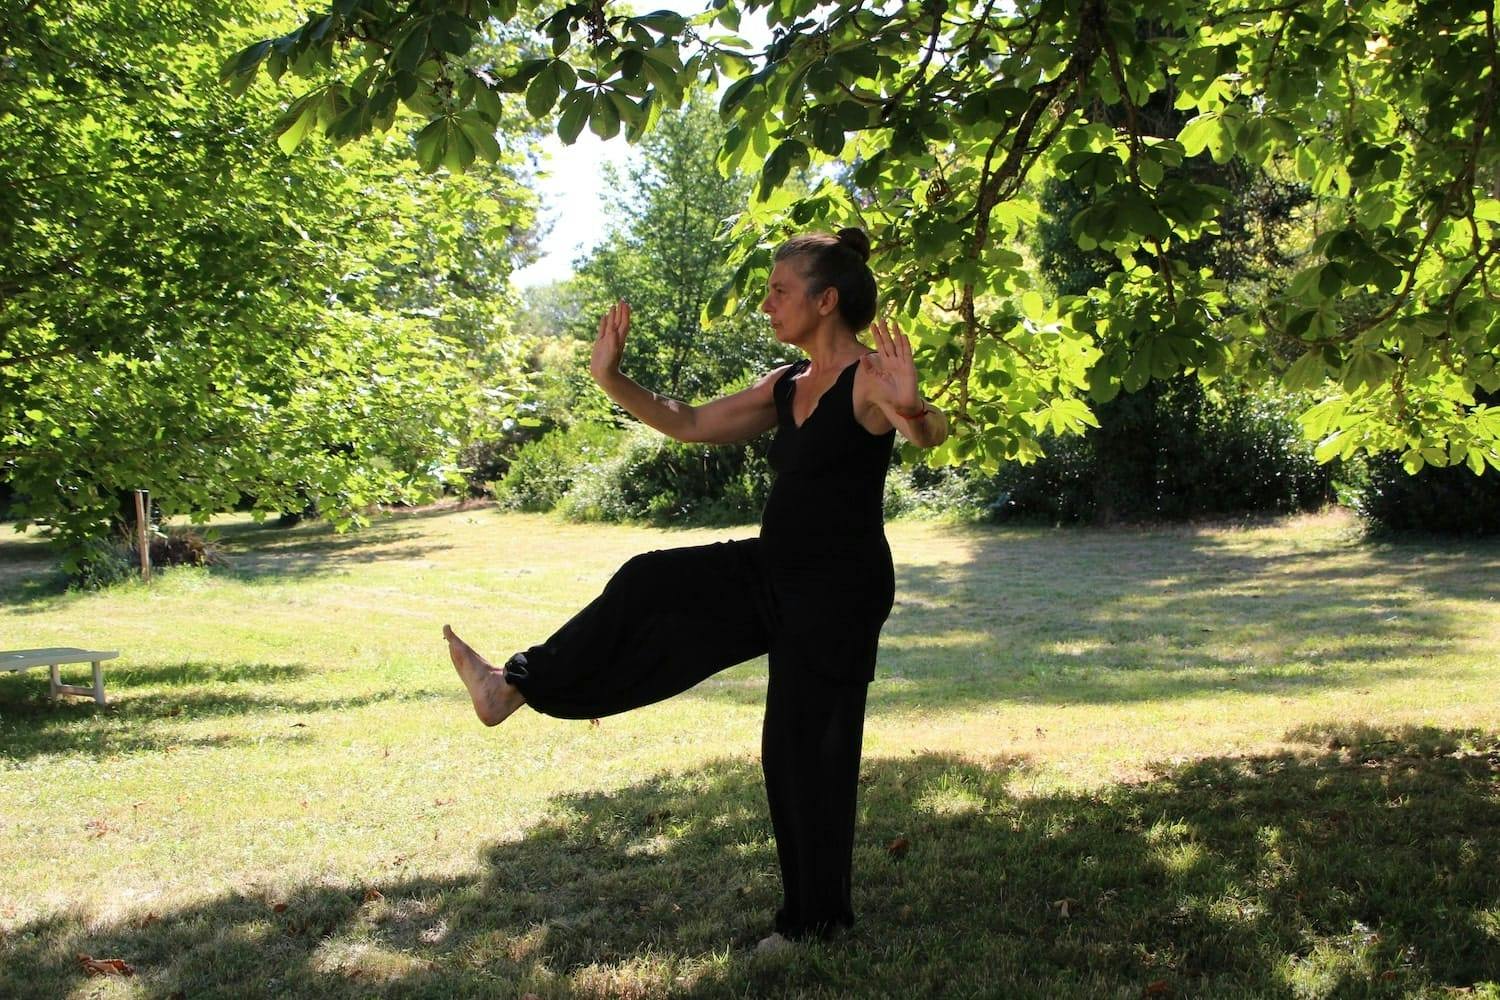 Person stood in a Tai chi pose on grass surrounded by trees. 